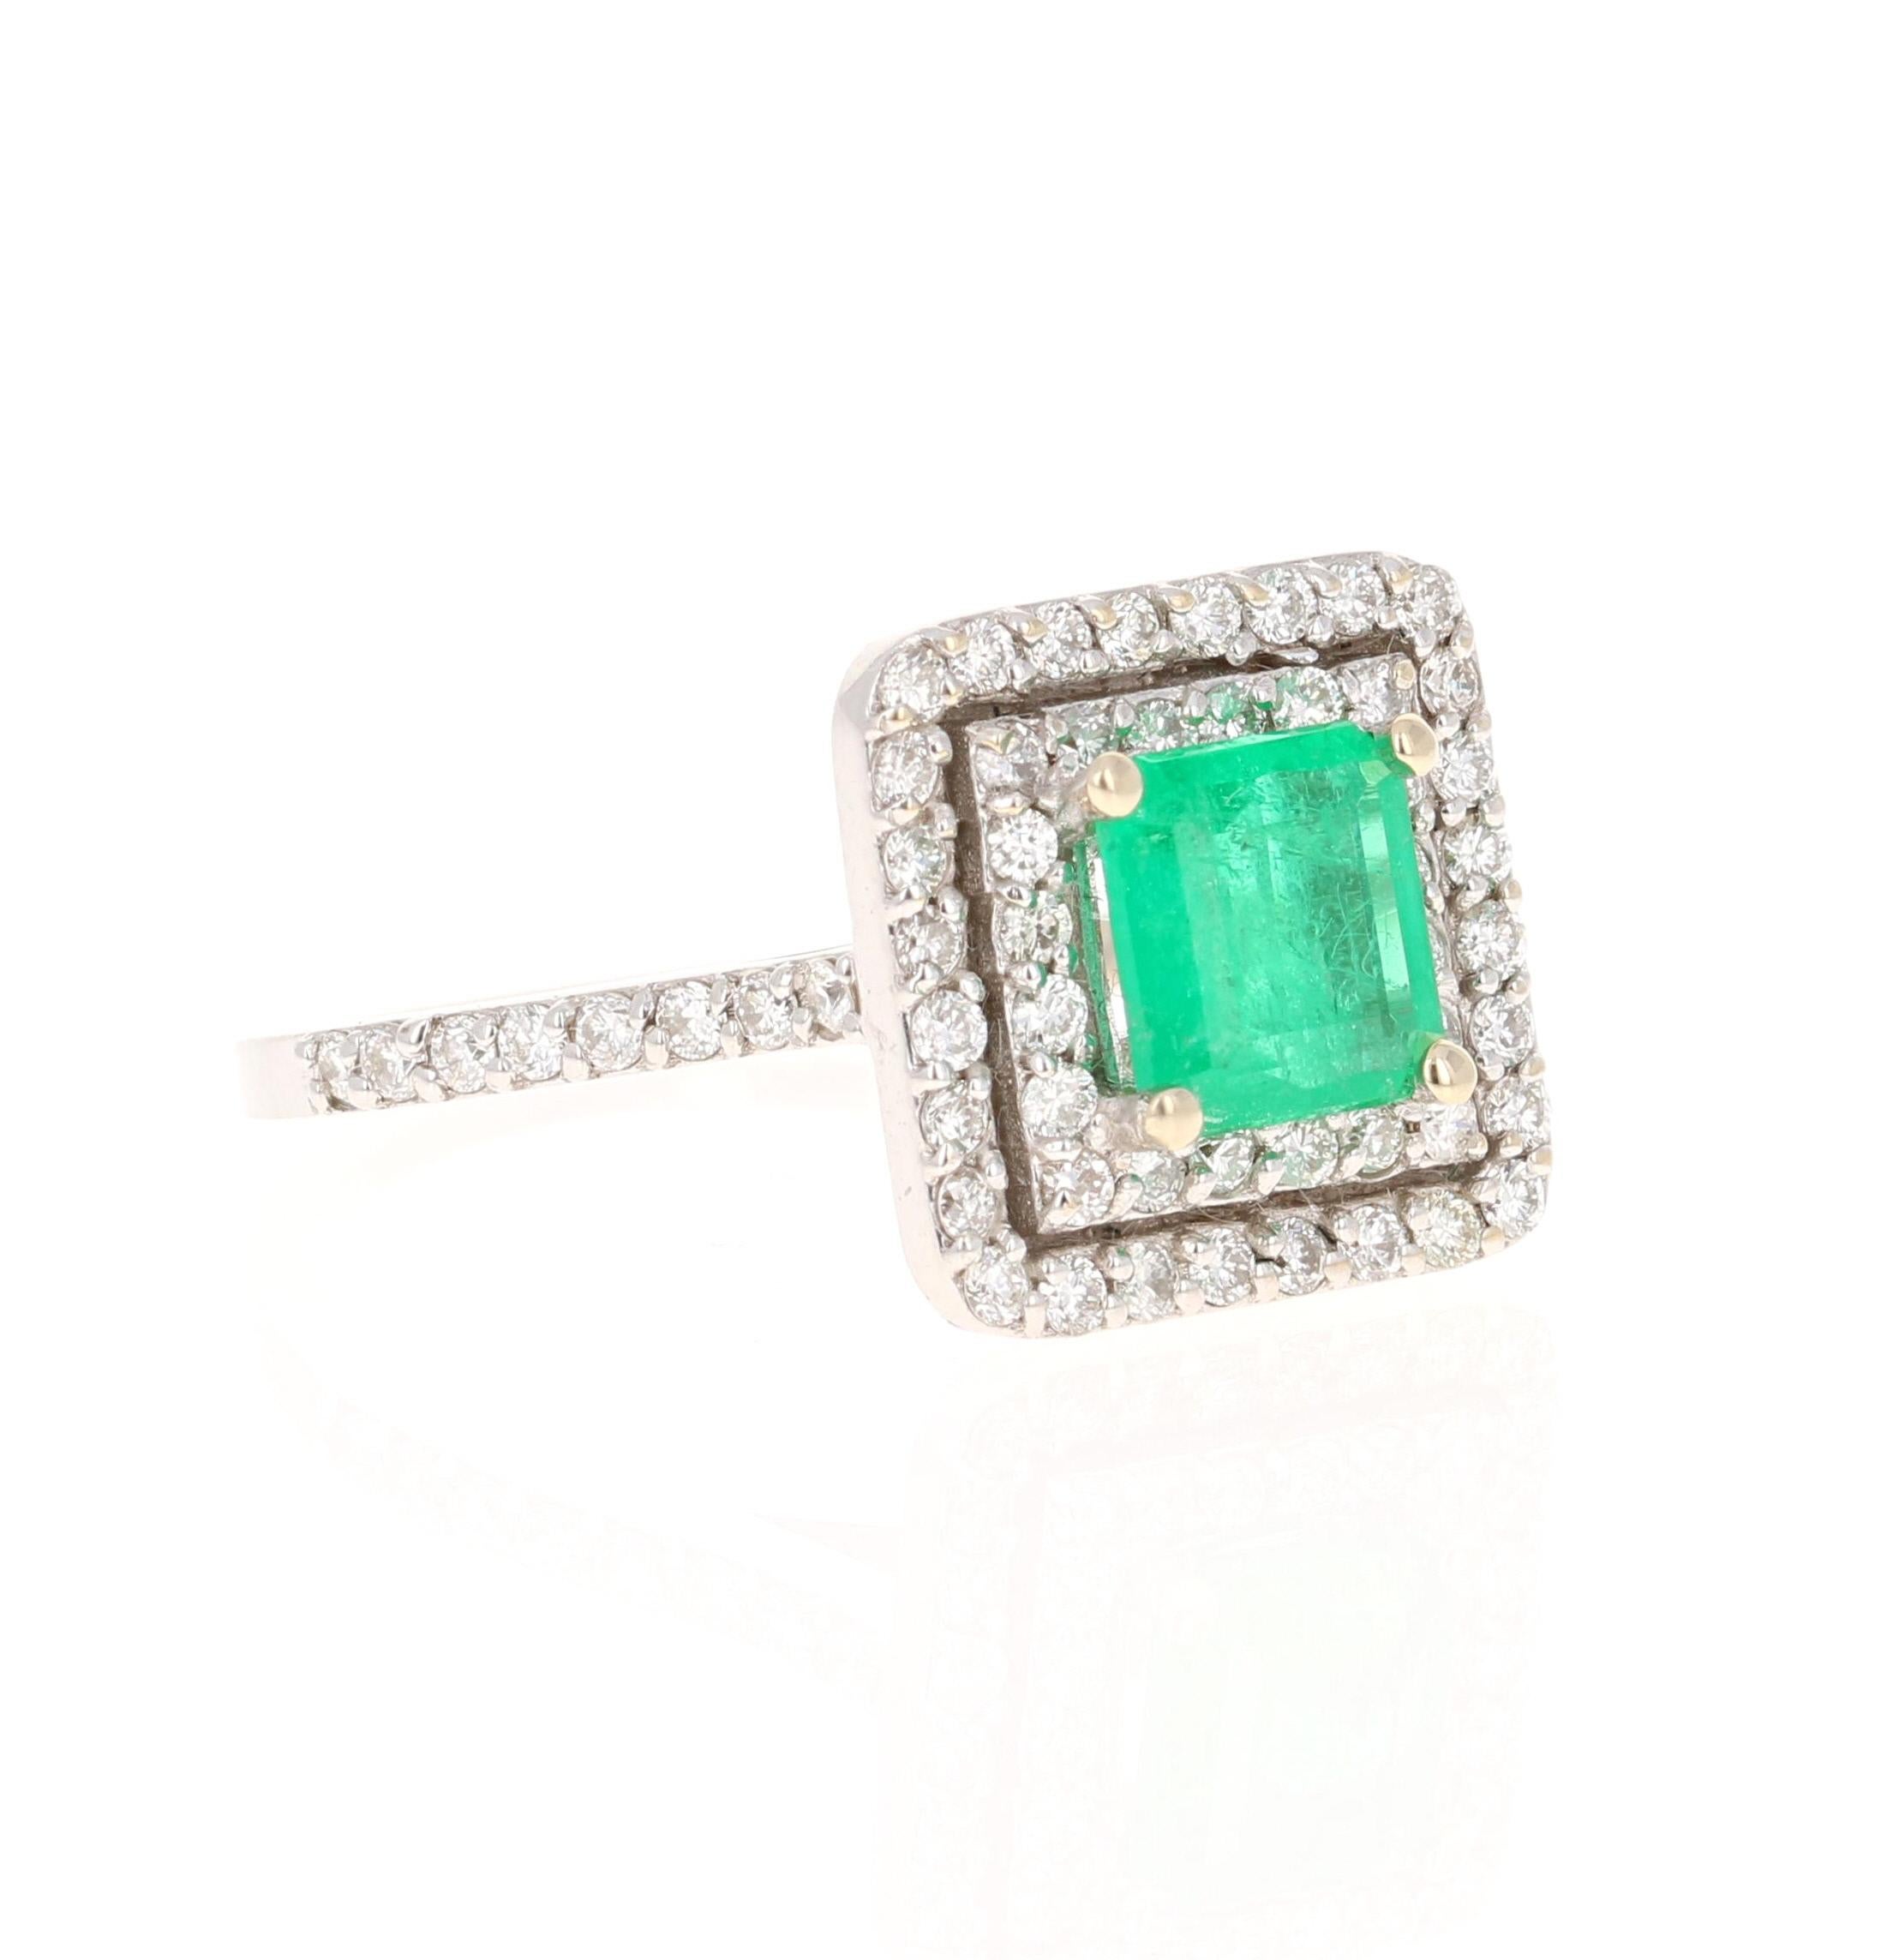 Exquisite Square-Emerald Cut Emerald Diamond Ring! 

The center is an Square Step Cut Emerald which weighs 0.93 Carats and measures.  The Emerald is surrounded by 64 Round Cut Diamonds weighing 0.61 Carats (Clarity: VS, Color: F). The total carat